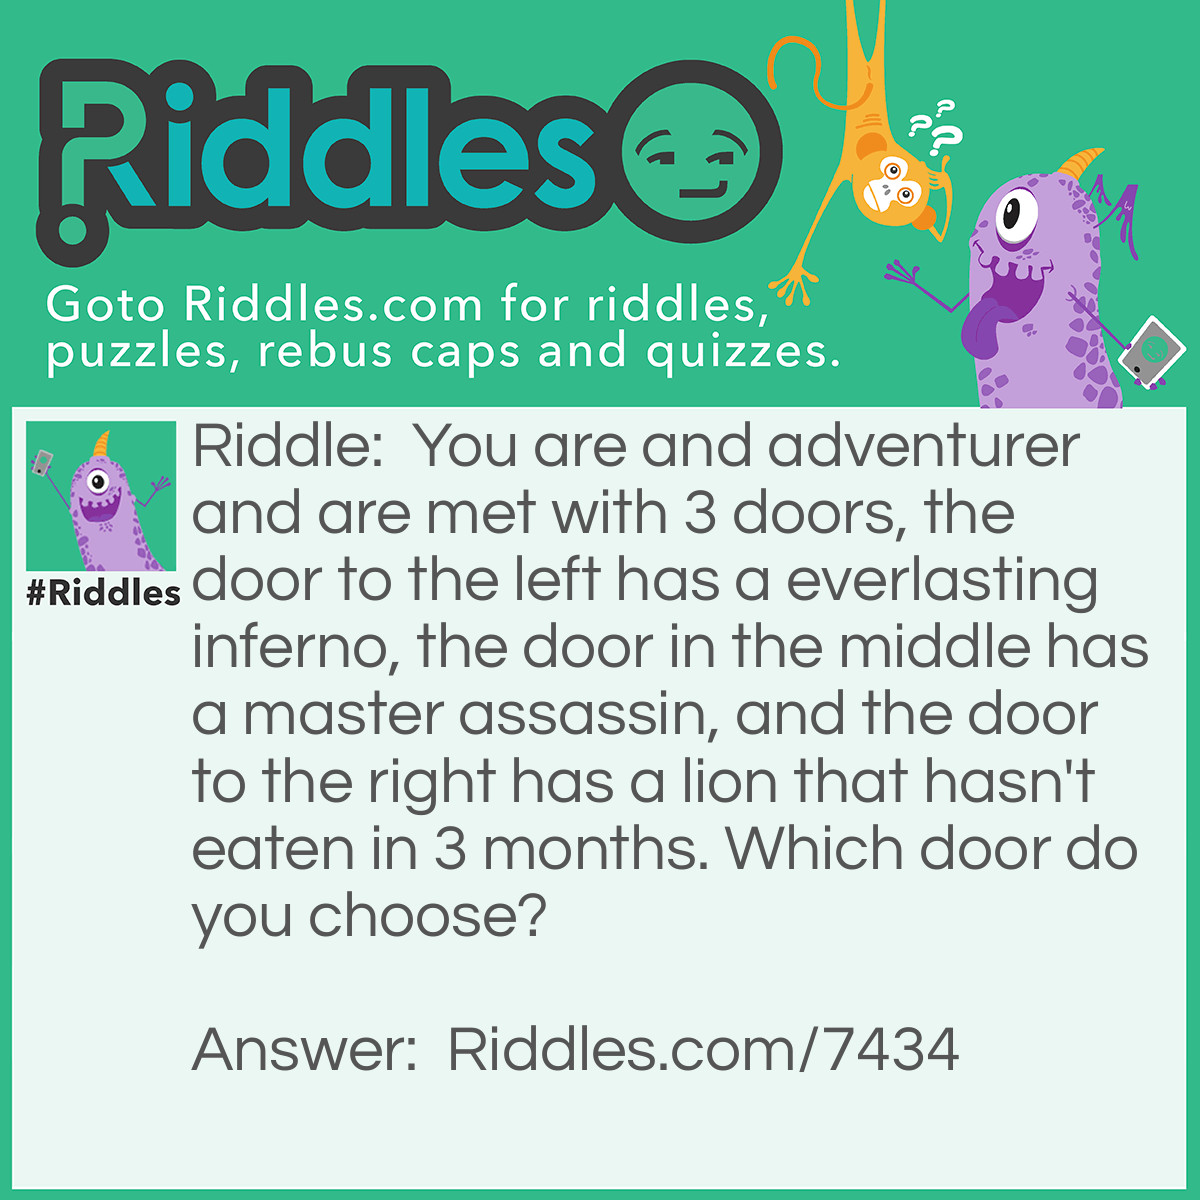 Riddle: You are and adventurer and are met with 3 doors, the door to the left has a everlasting inferno, the door in the middle has a master assassin, and the door to the right has a lion that hasn't eaten in 3 months. Which door do you choose? Answer: The door to the right because the lion would be dead from not eating for 3 months.